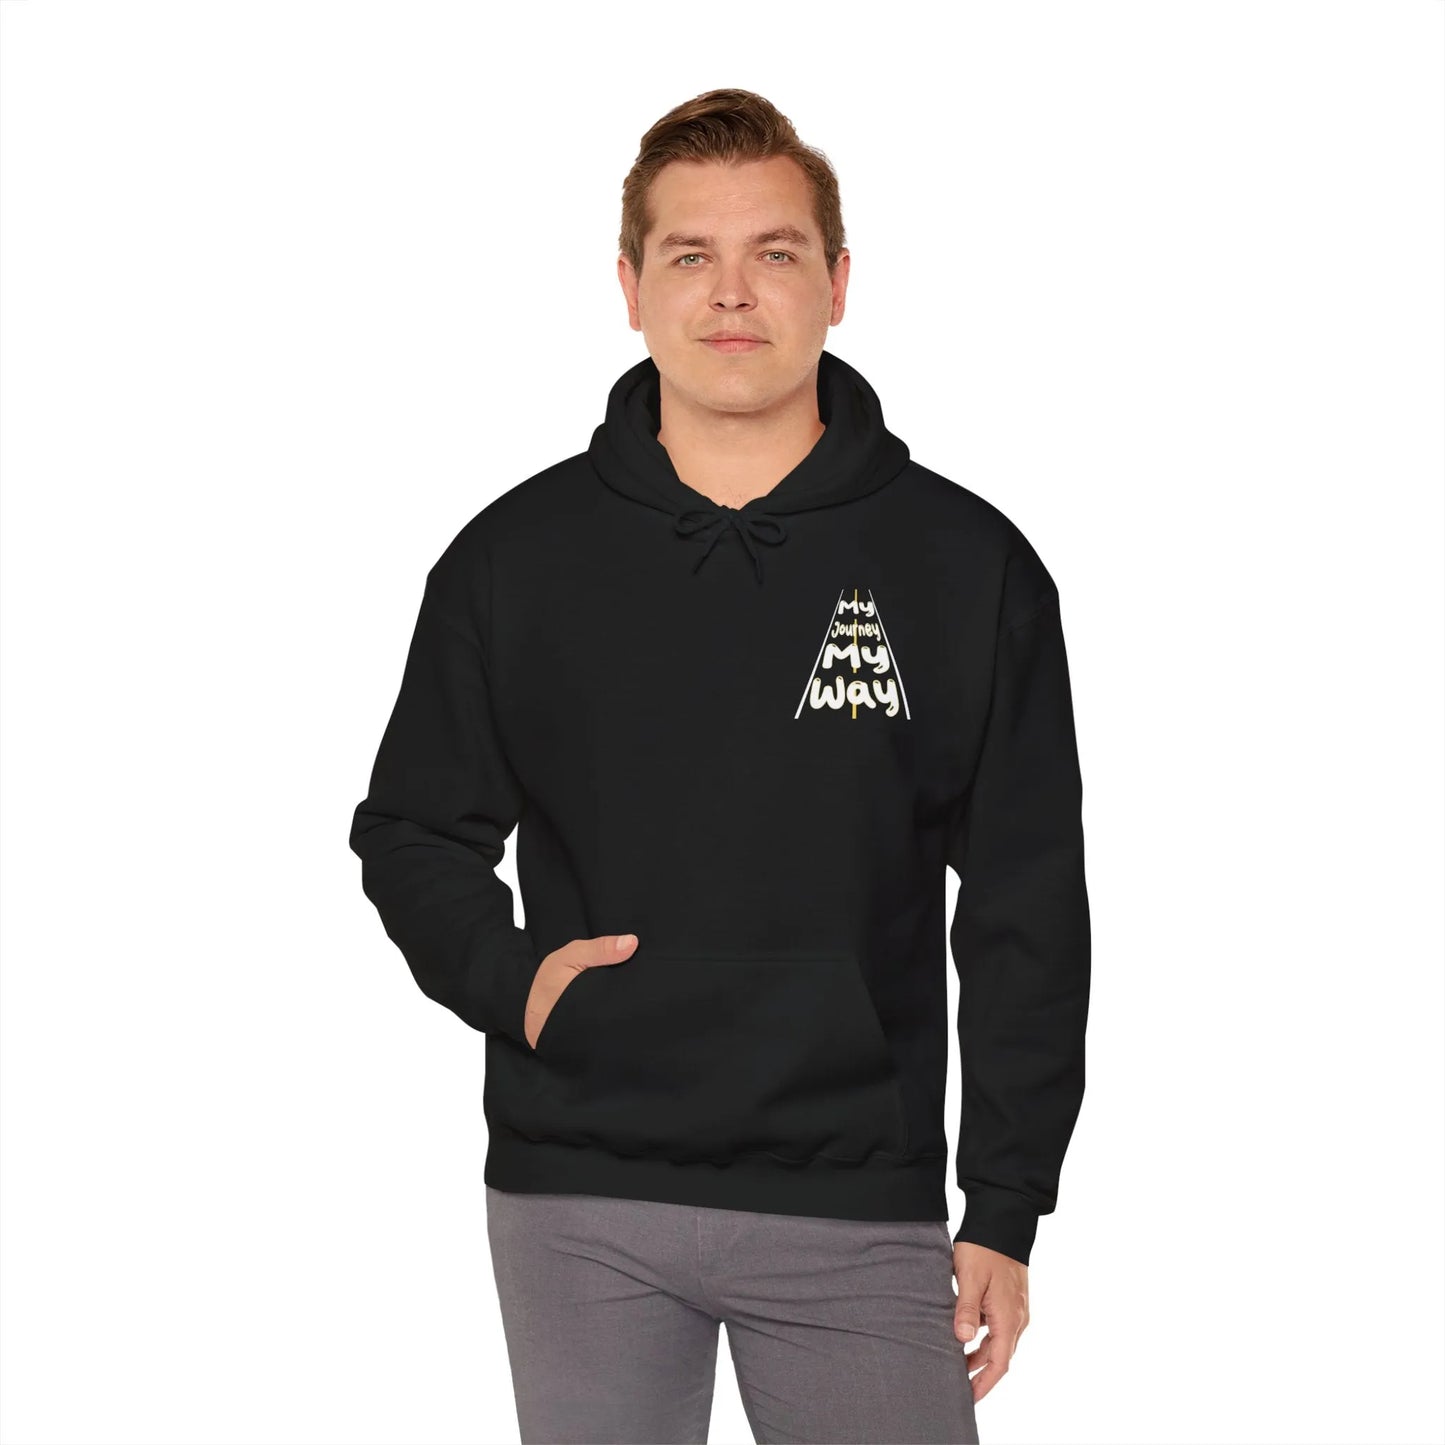 My Journey My Way: Stay In Your Lane Hooded Sweatshirt - Stay In Your Lane Sweatshirt - Trendy Graphic  Hoodie Front Male Model 2